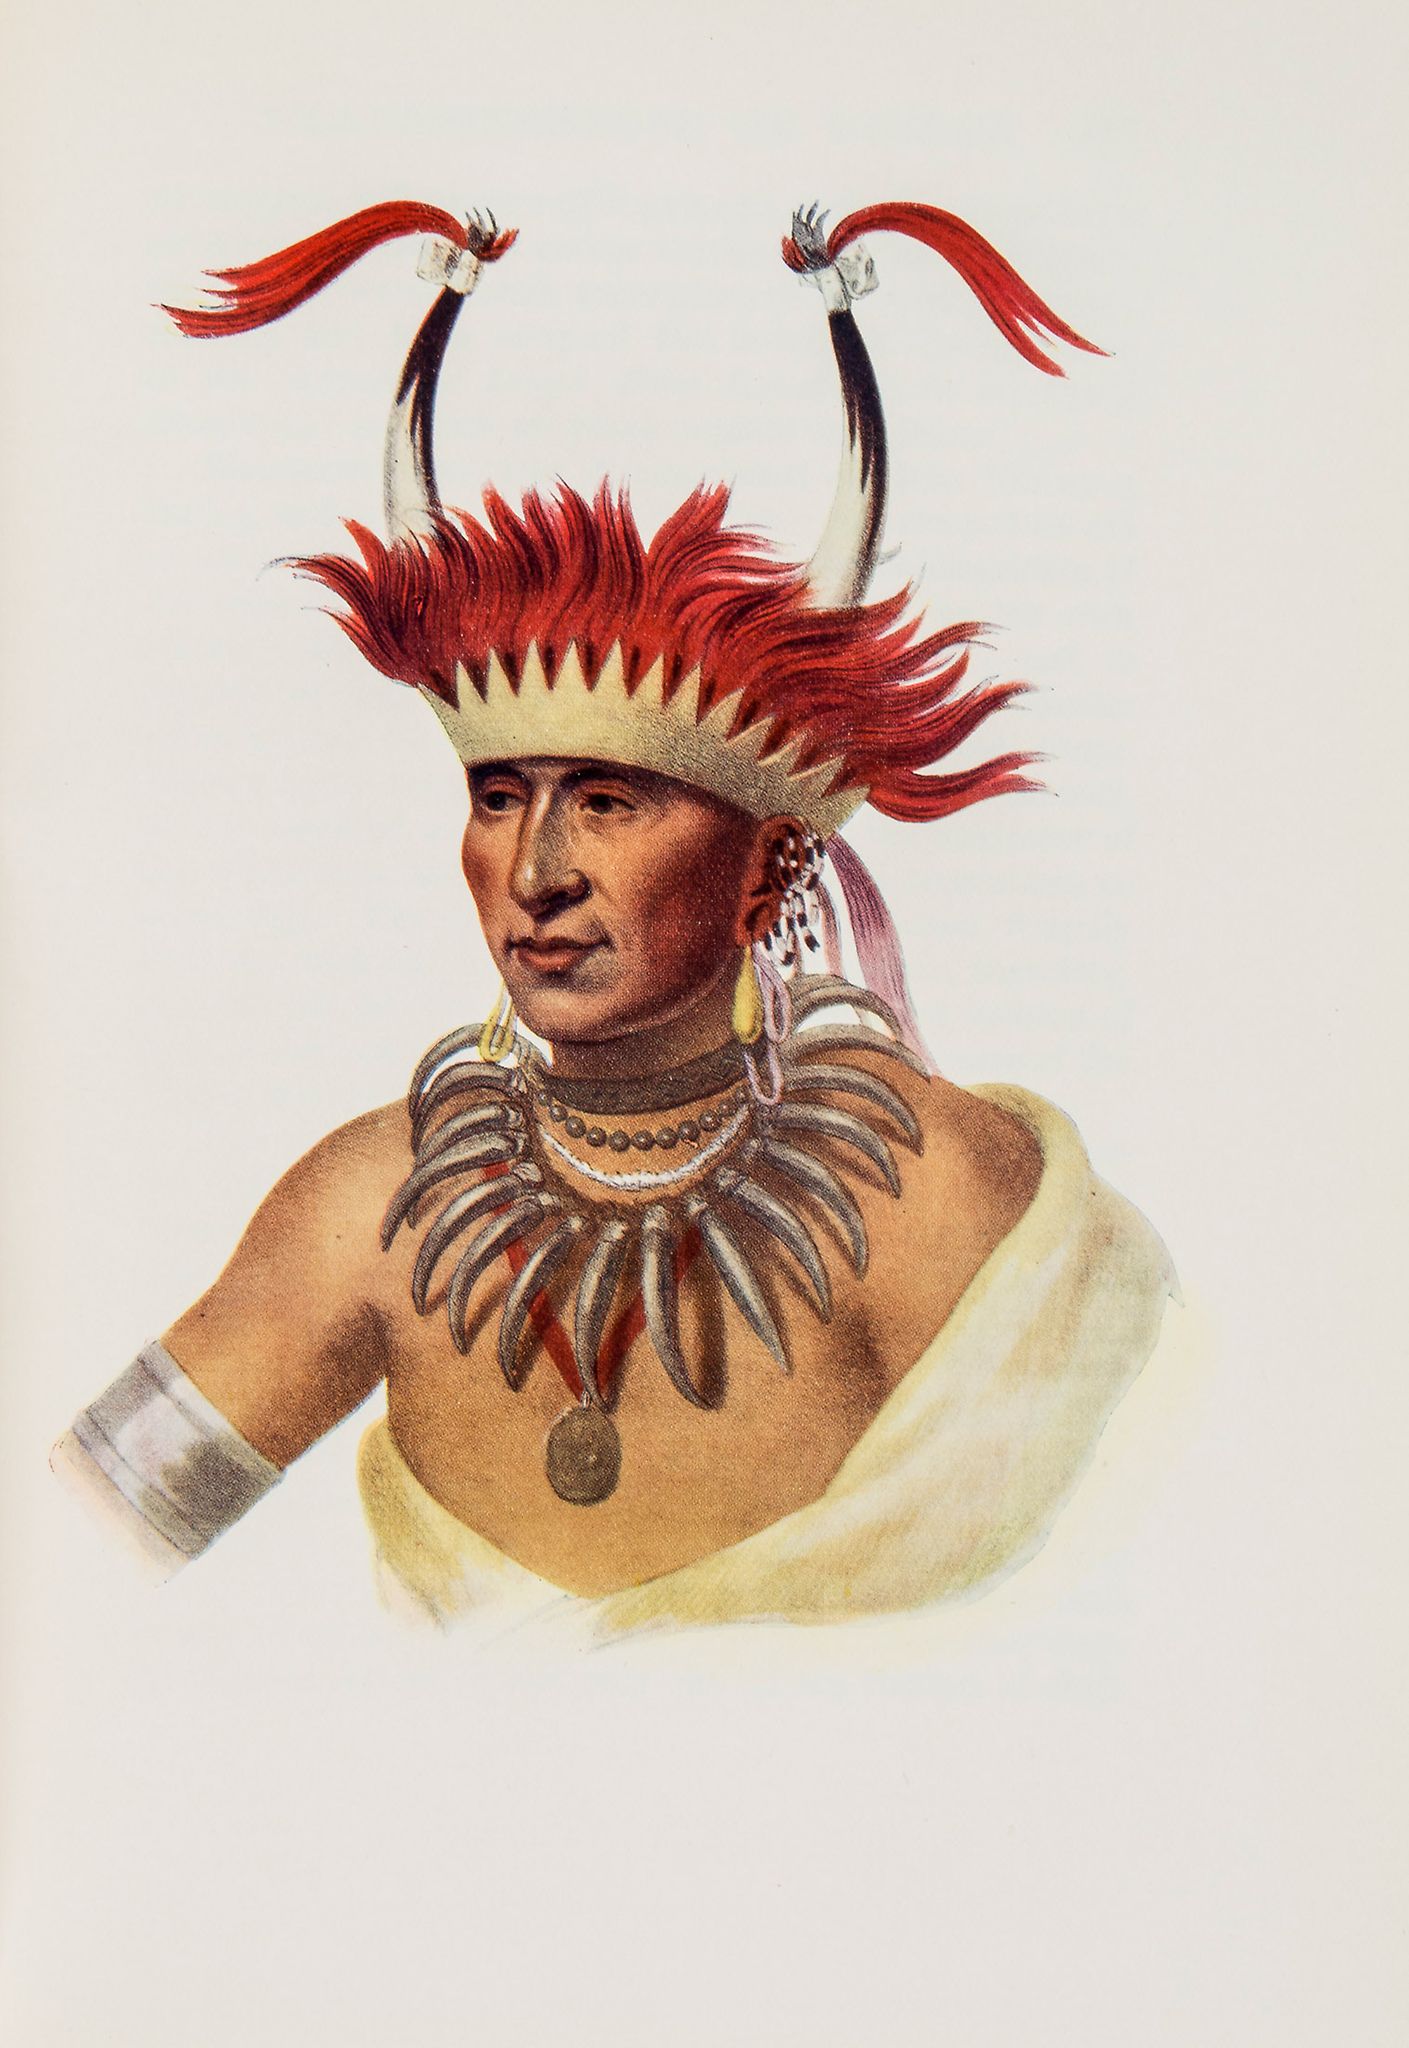 McKenney (Thomas L.) and James Hall. - The Indian Tribes of North America, edited by F.W.Hodge and